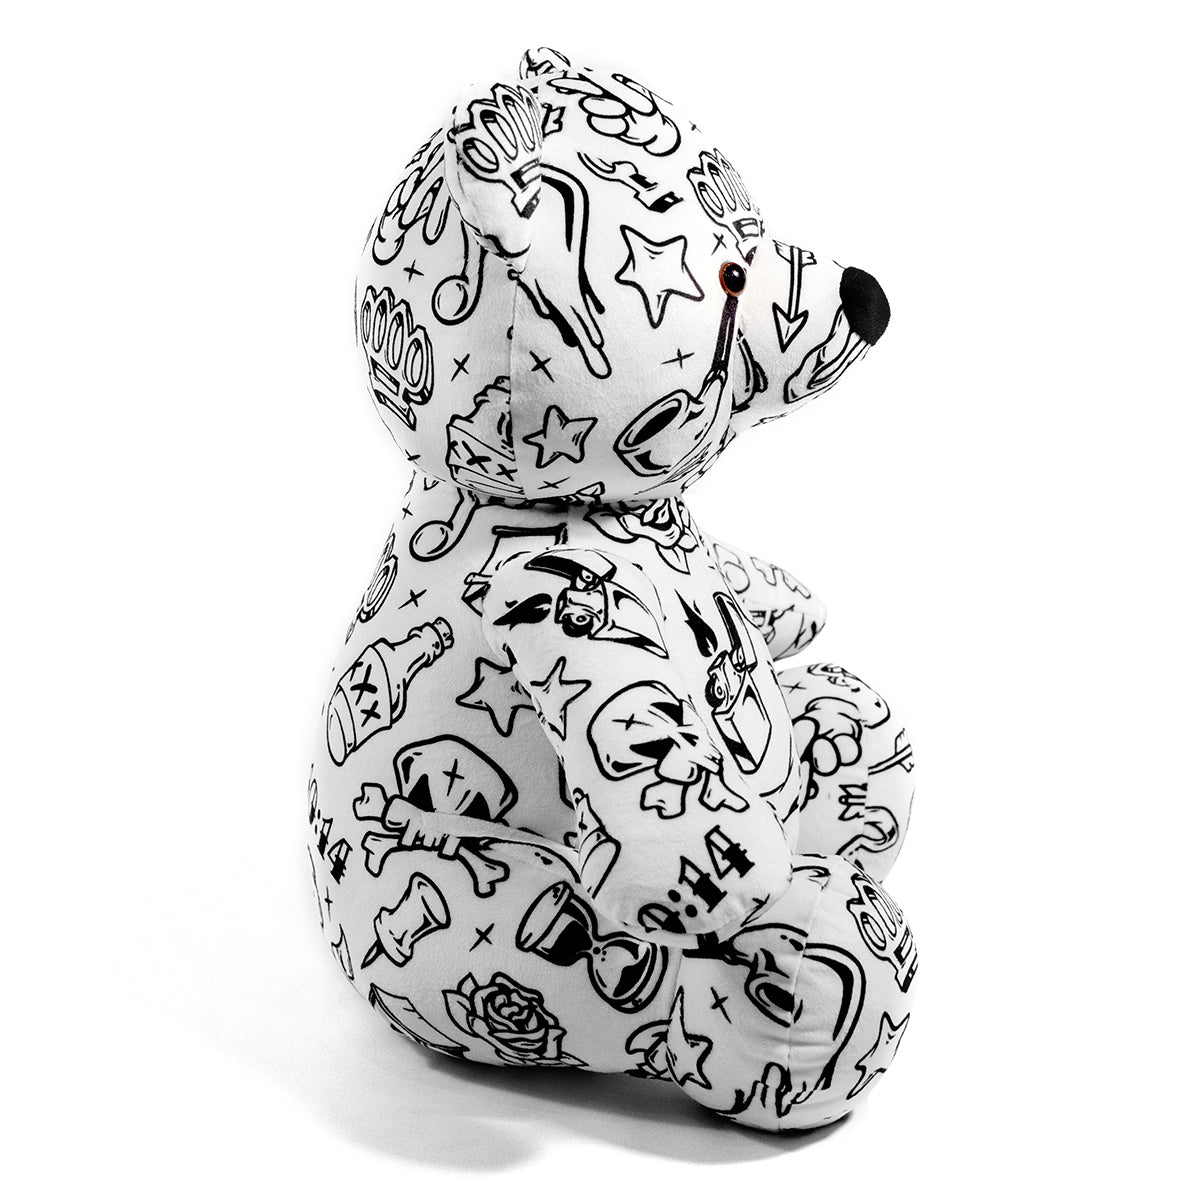 Lost Art Canada - white black patterned teddy bear right side view